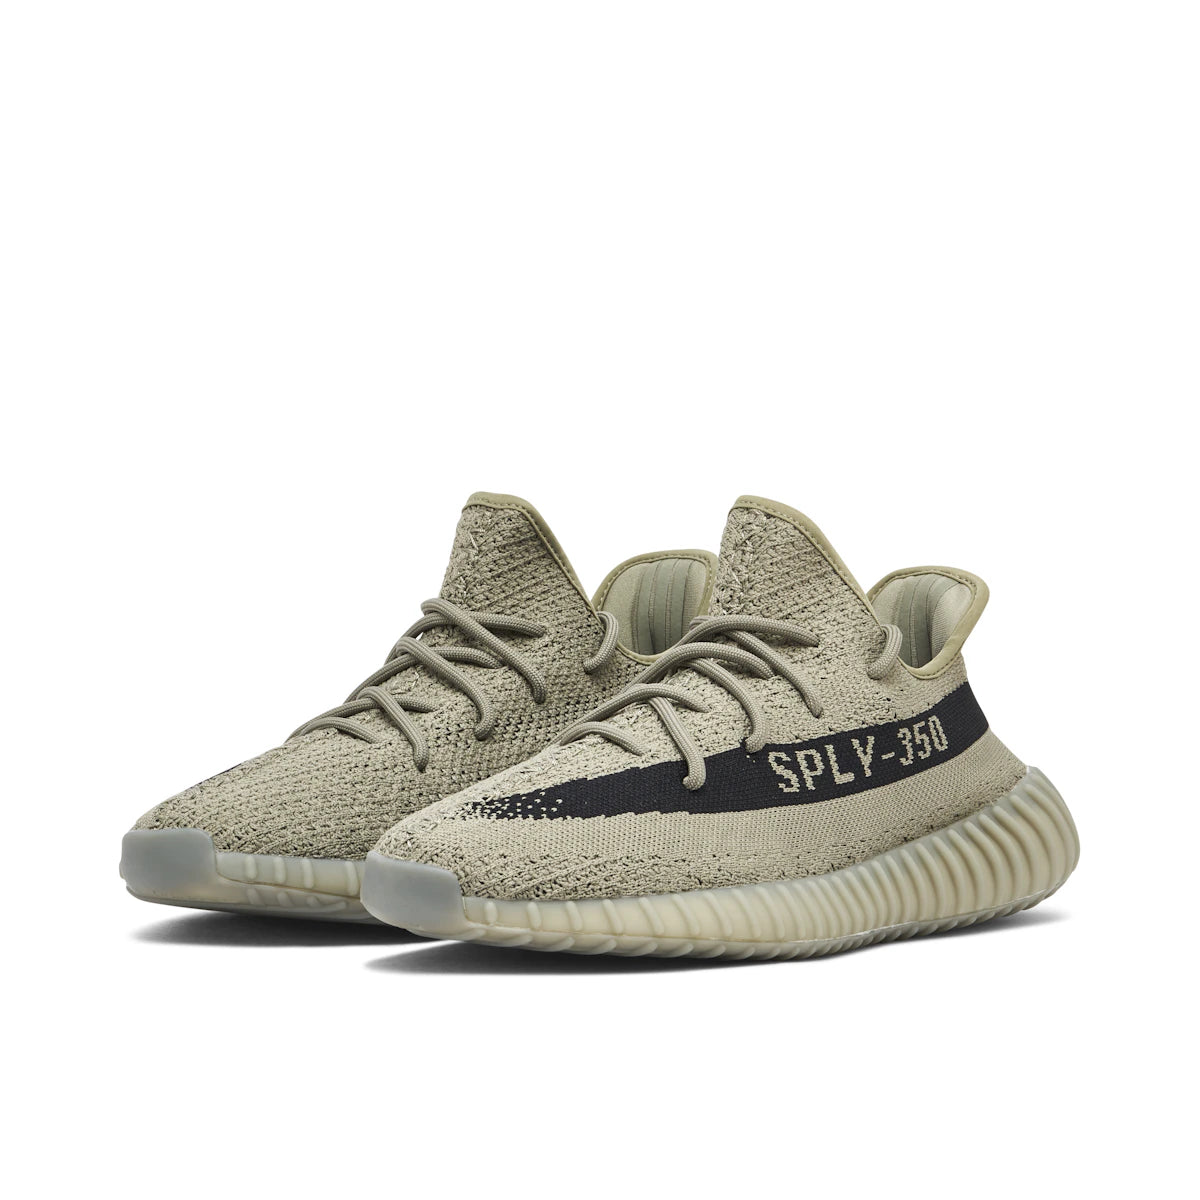 adidas Yeezy Boost 350 V2 Granite by Yeezy from £230.00